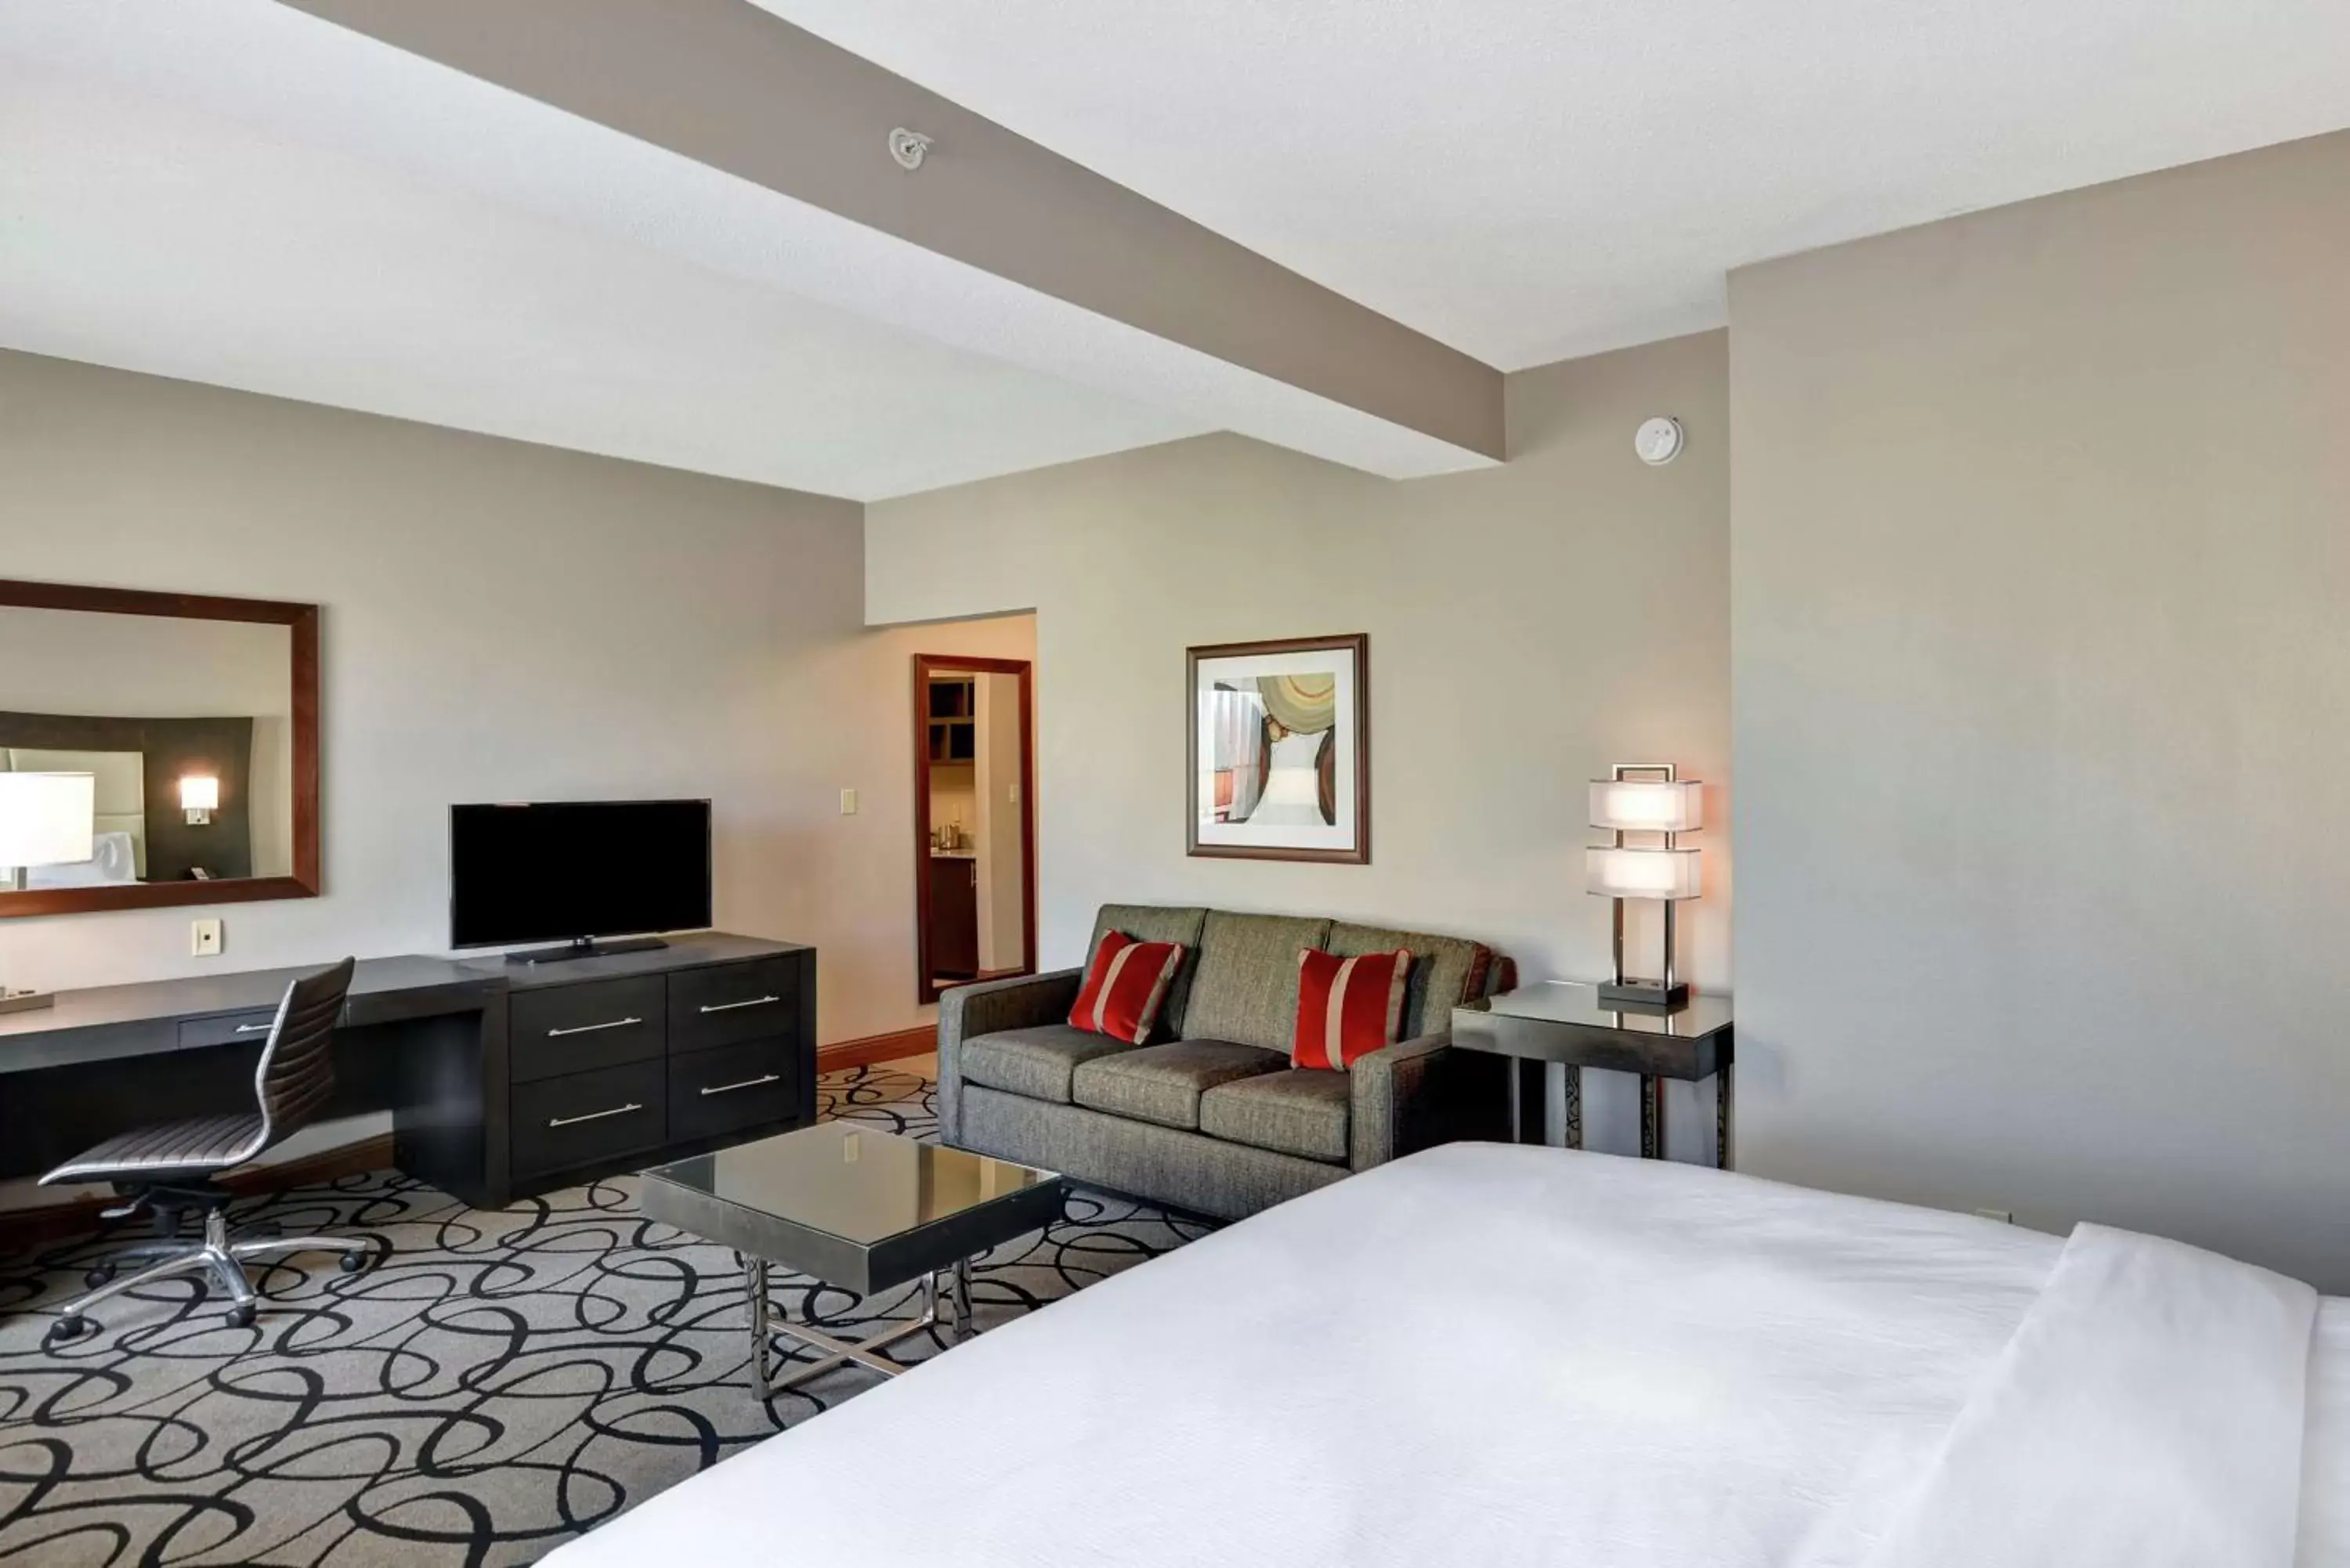 Bedroom, TV/Entertainment Center in DoubleTree by Hilton Hattiesburg, MS